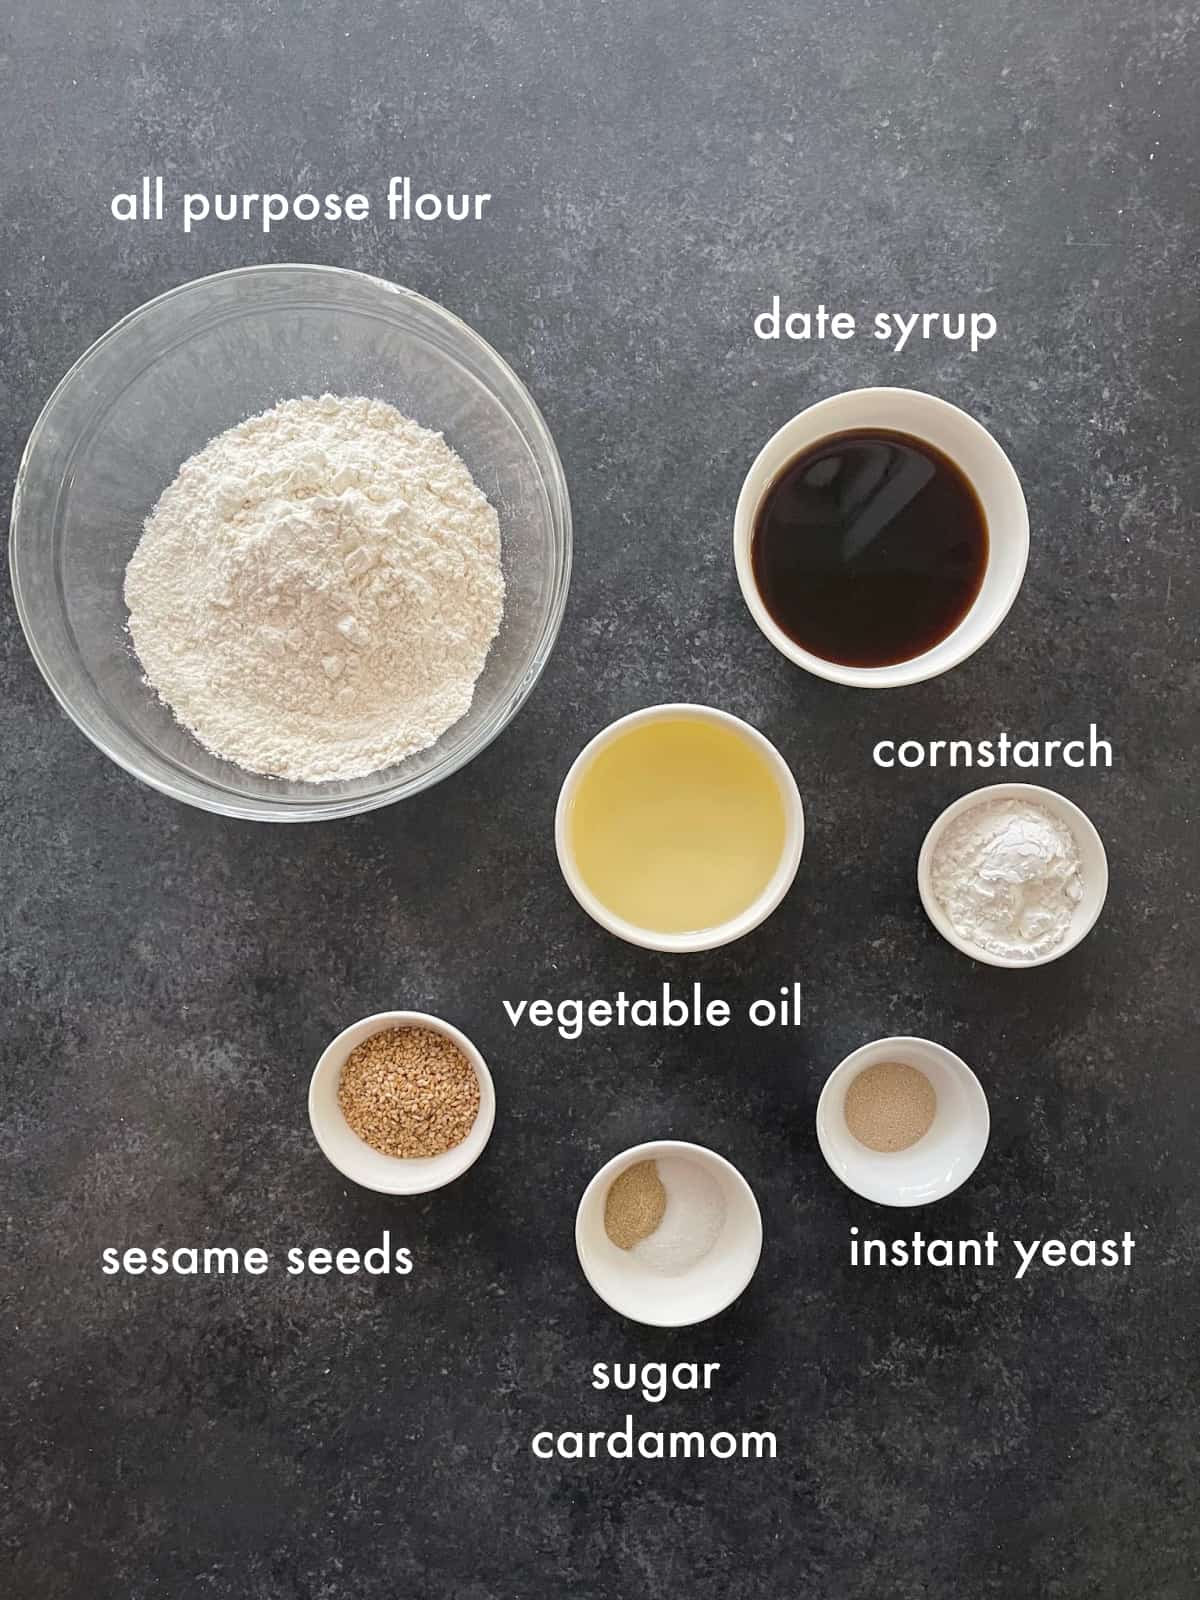 to make luqaimat you need flour, yeast, salt, sugar, cardamom, water, oil and date syrup. 